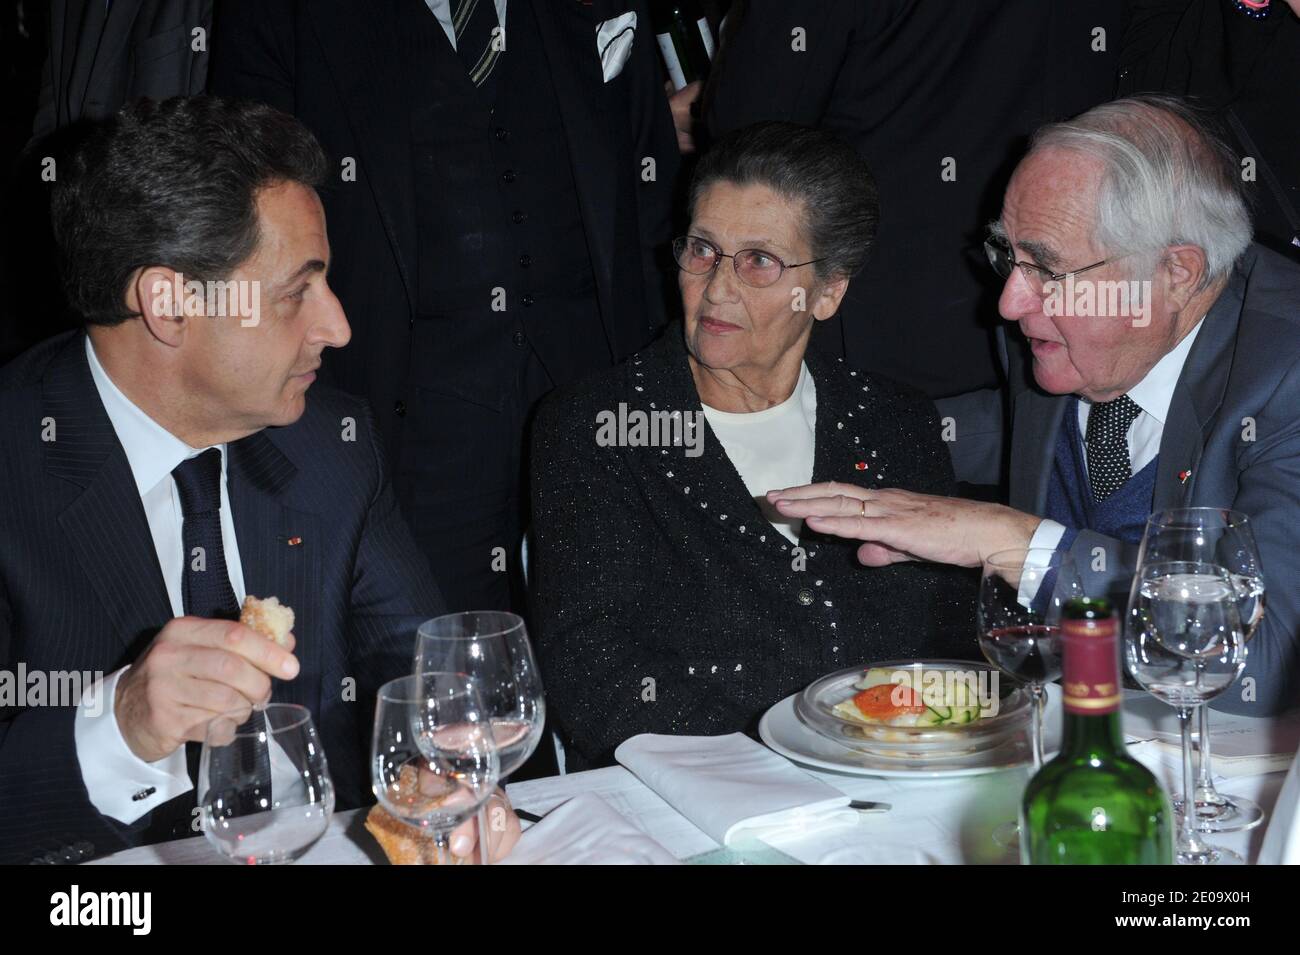 French President Nicolas Sarkozy, Simone and Antoine Veil pictured during the 'CRIF' (French Jewish community representative council) 27th annual dinner, held at Pavillon d'Armenonville, in Paris, France on February 8, 2012. Photo by Christophe Guibbaud/ABACAPRESS.COM Stock Photo